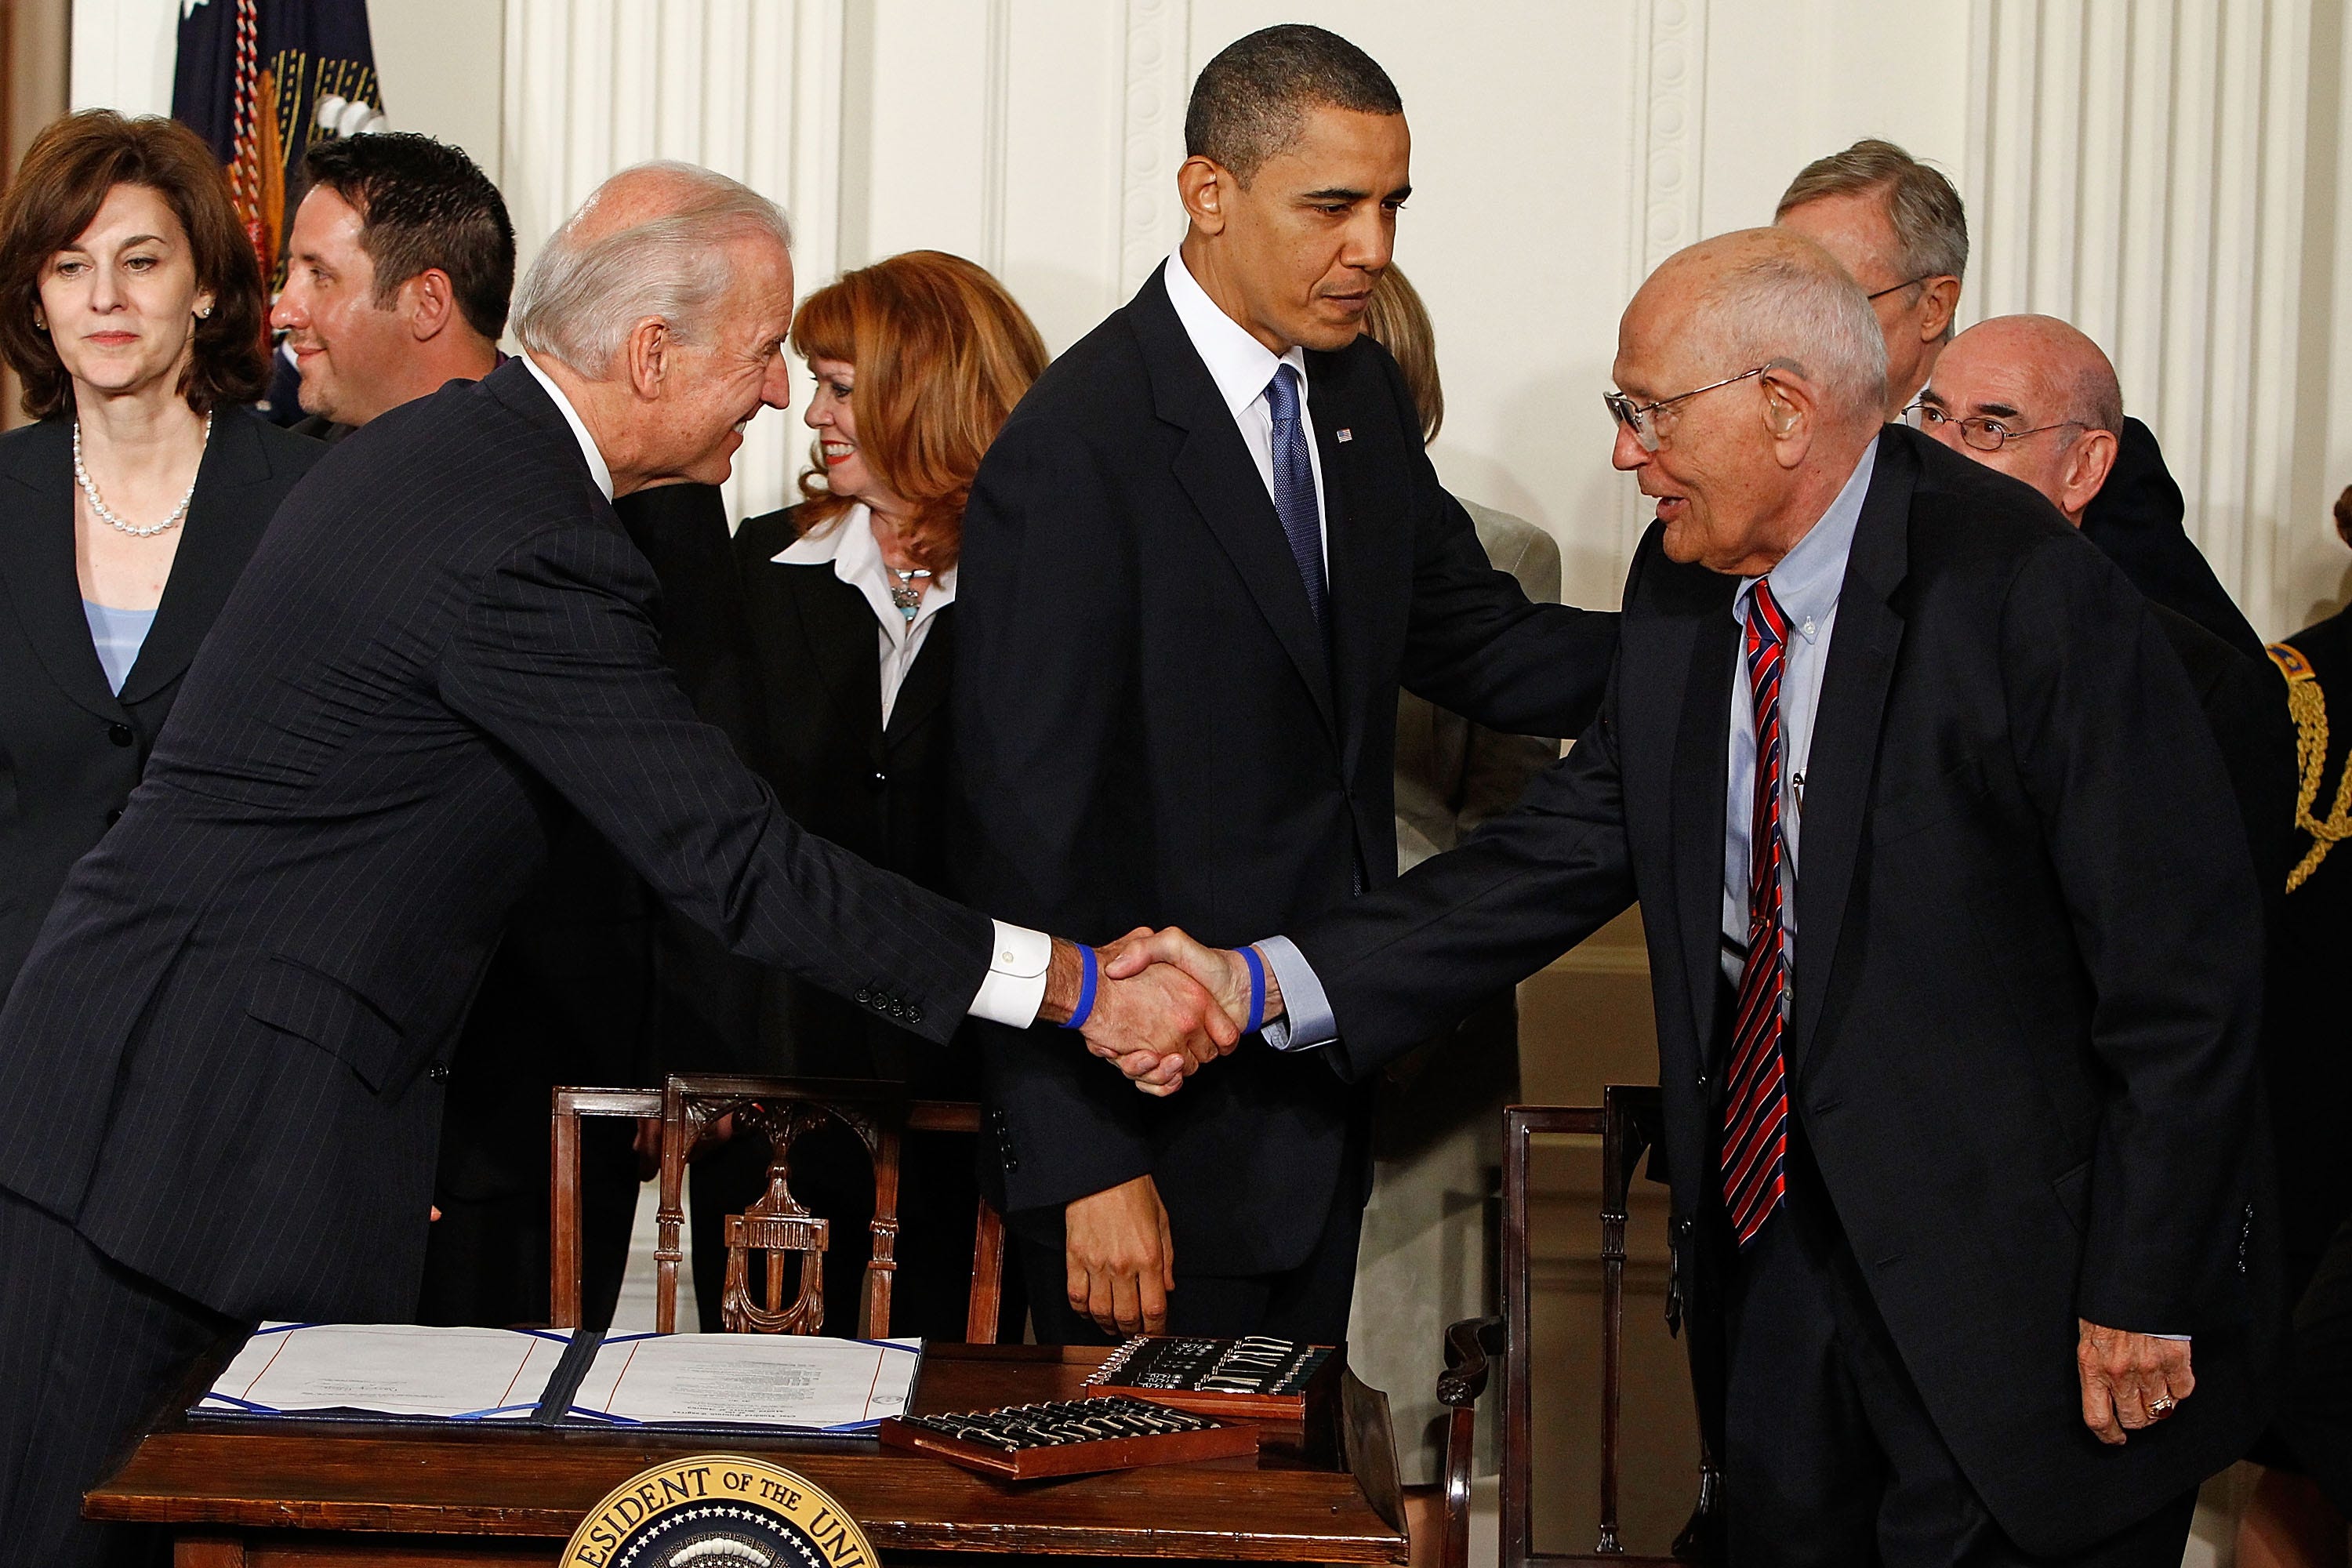 Vice President Joe Biden and President Barack Obama shake hands with Dingell before Obama signs the Affordable Health Care for America Act during a ceremony in the White House March 23, 2010. Dingell had introduced national health insurance legislation for more than 50 years before he finally saw it become law.